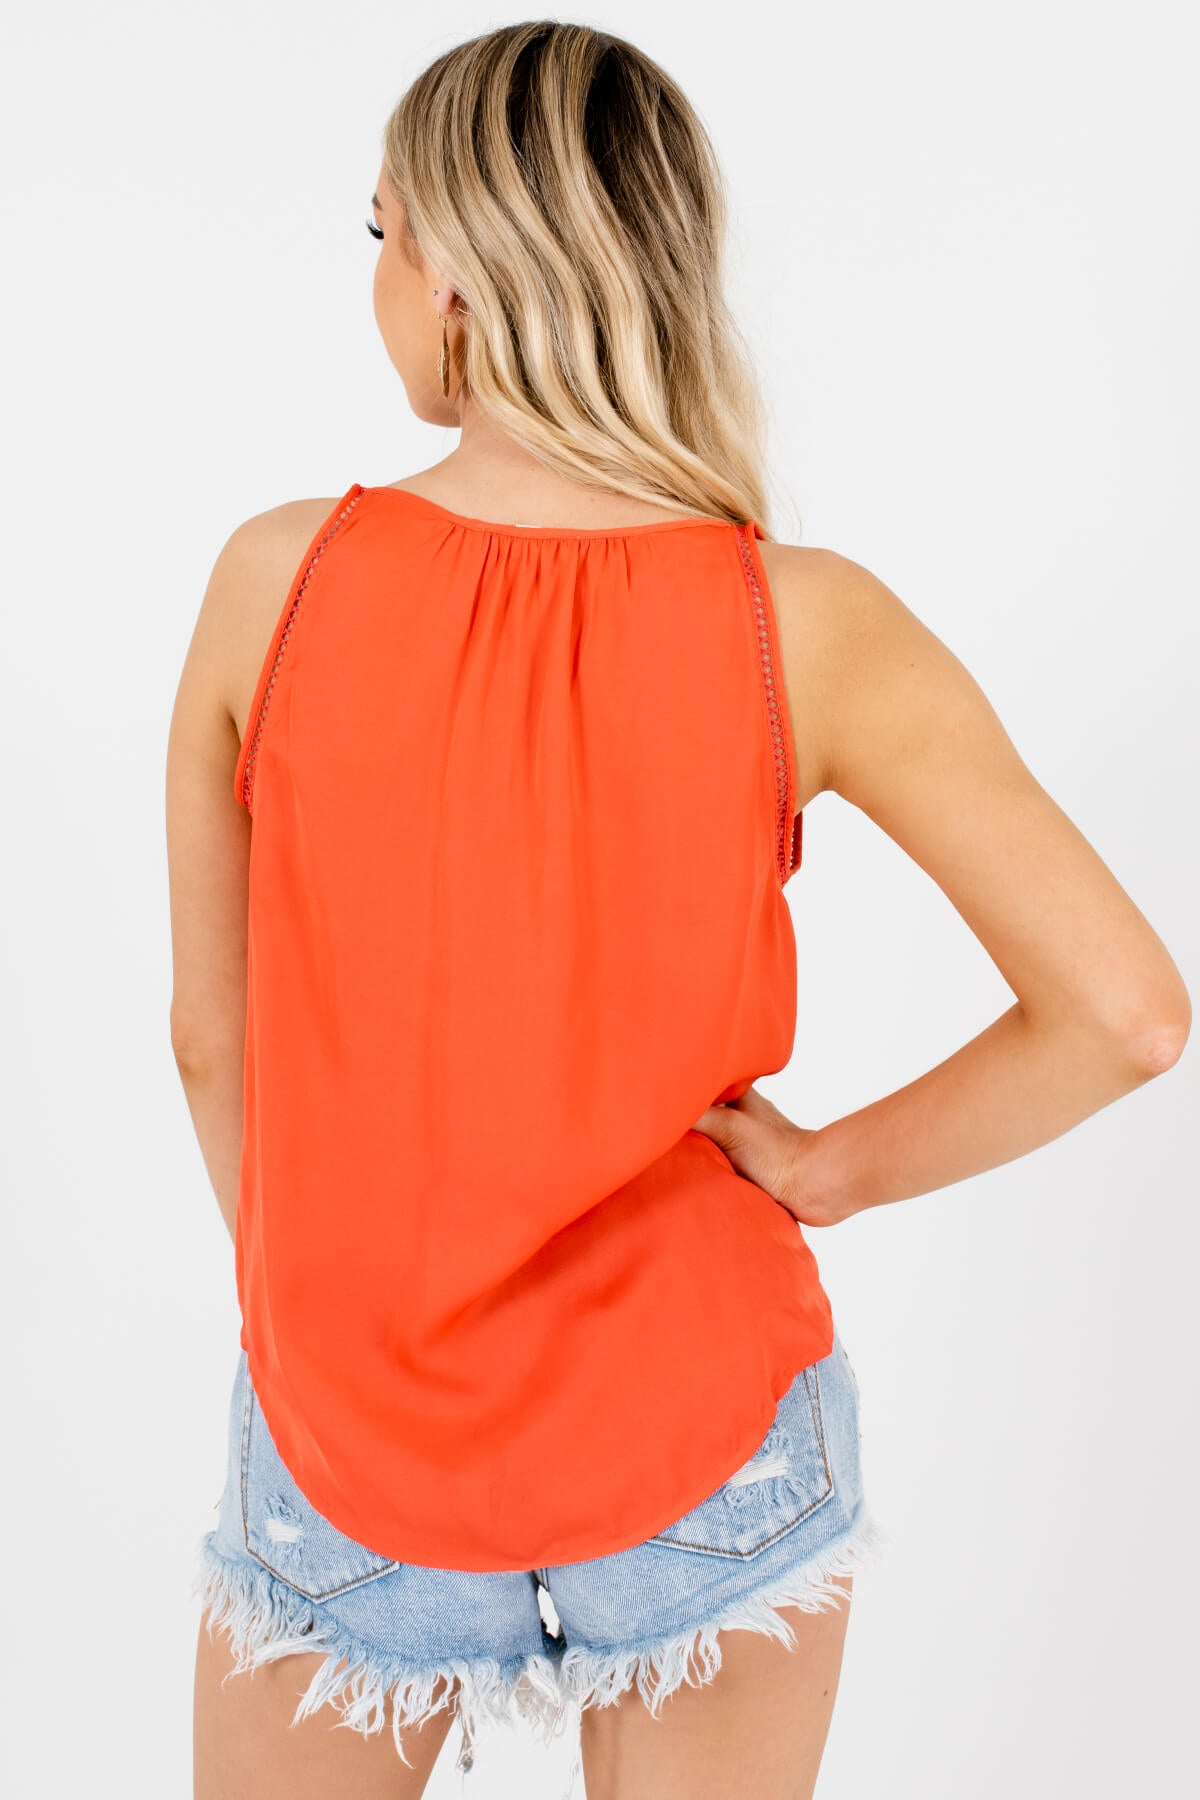 Women's Coral Pleated Accented Boutique Tanks